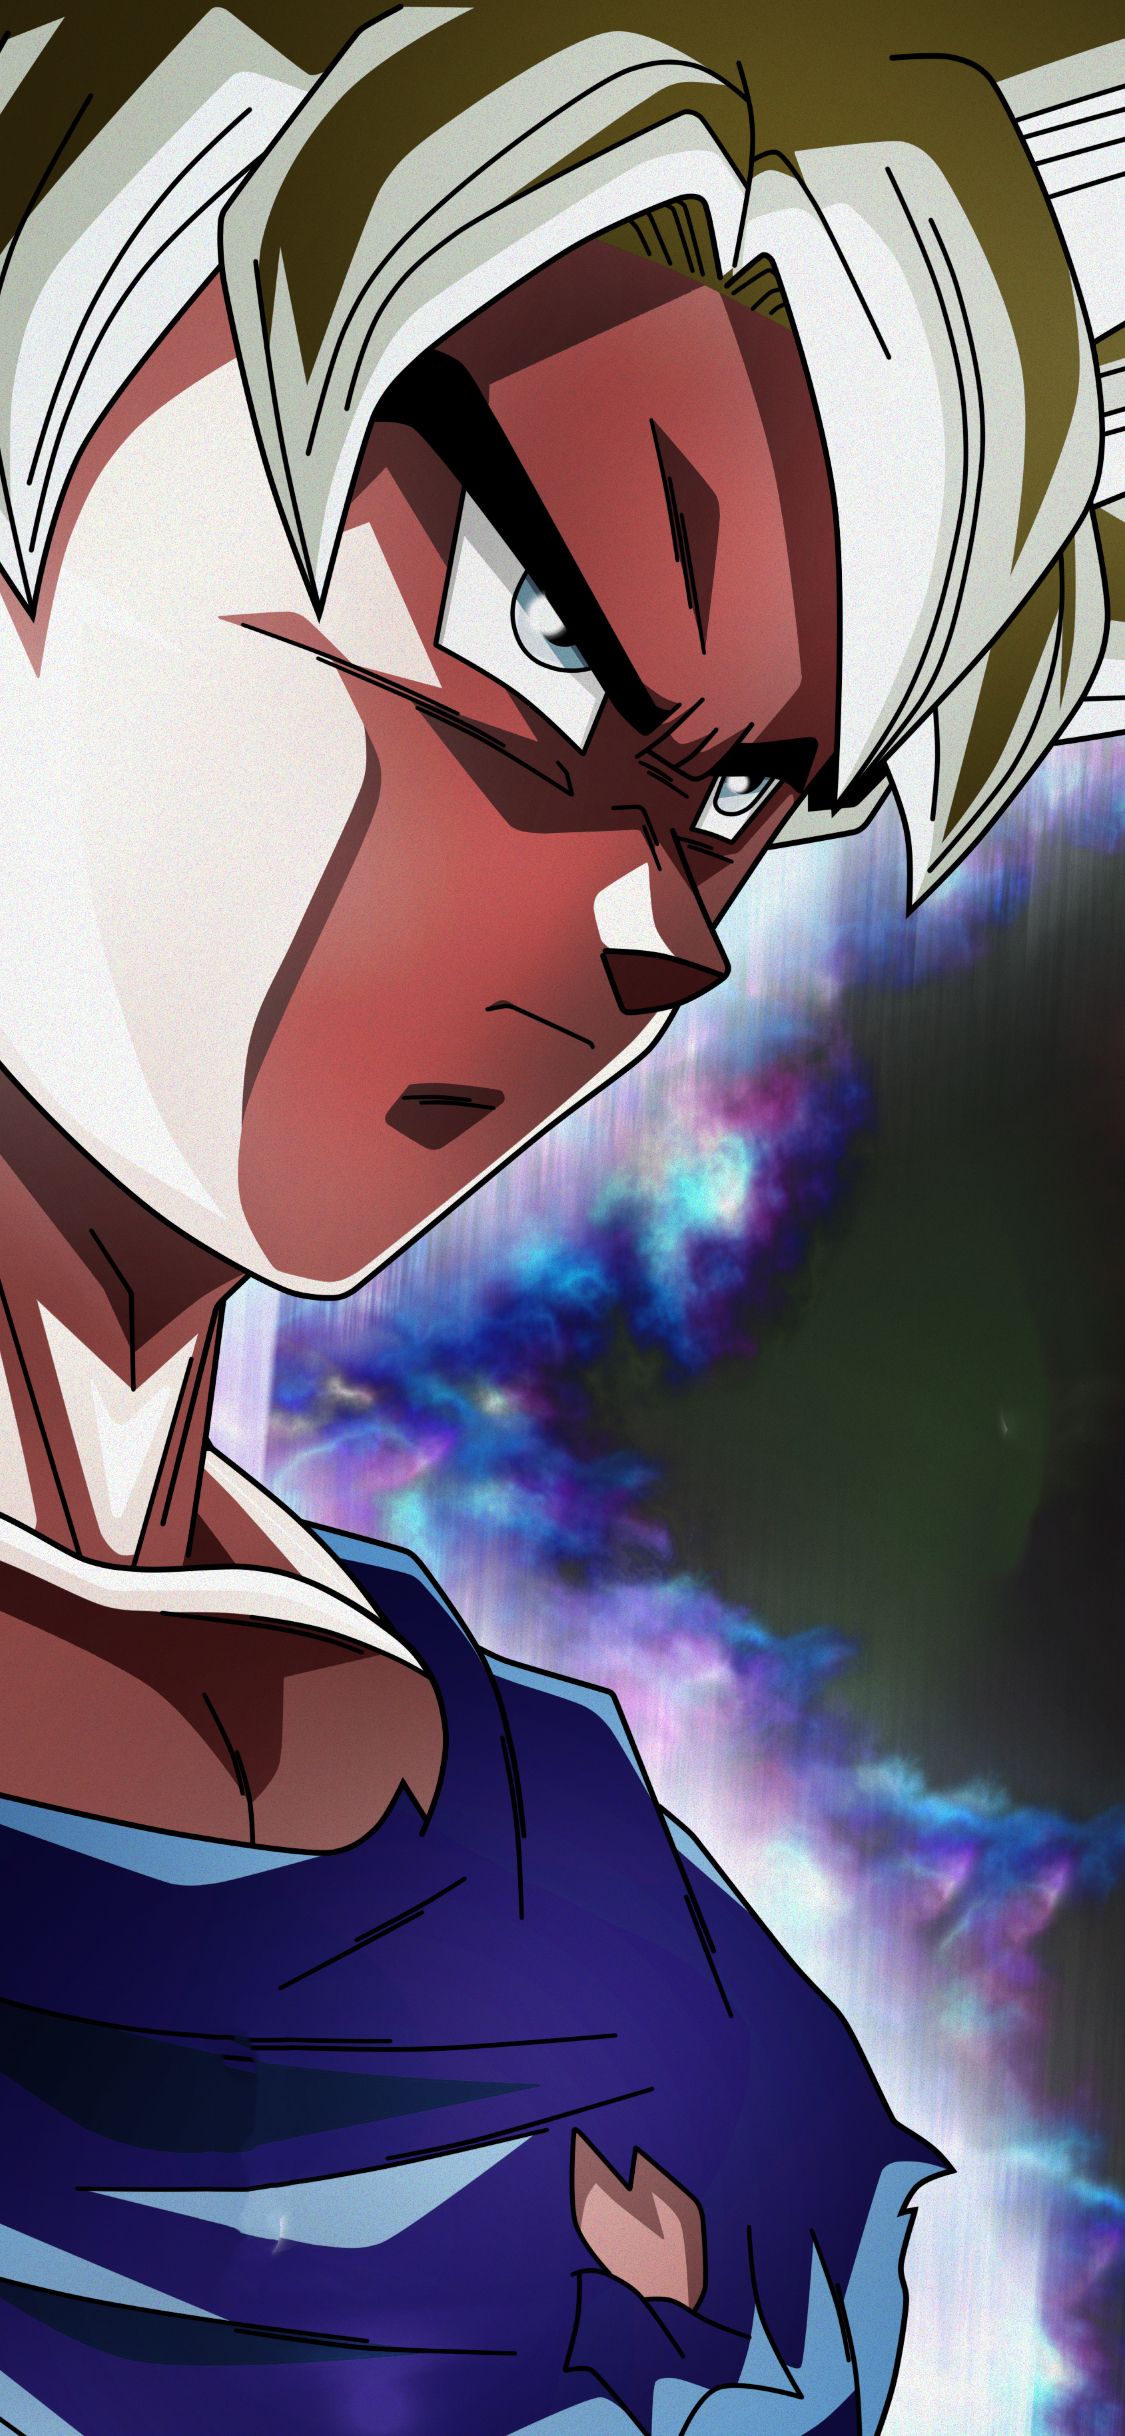 Angry Goku Dragon Ball Super iPhone XS, iPhone iPhone X Wallpaper, HD Anime 4K Wallpaper, Image, Photo and Background